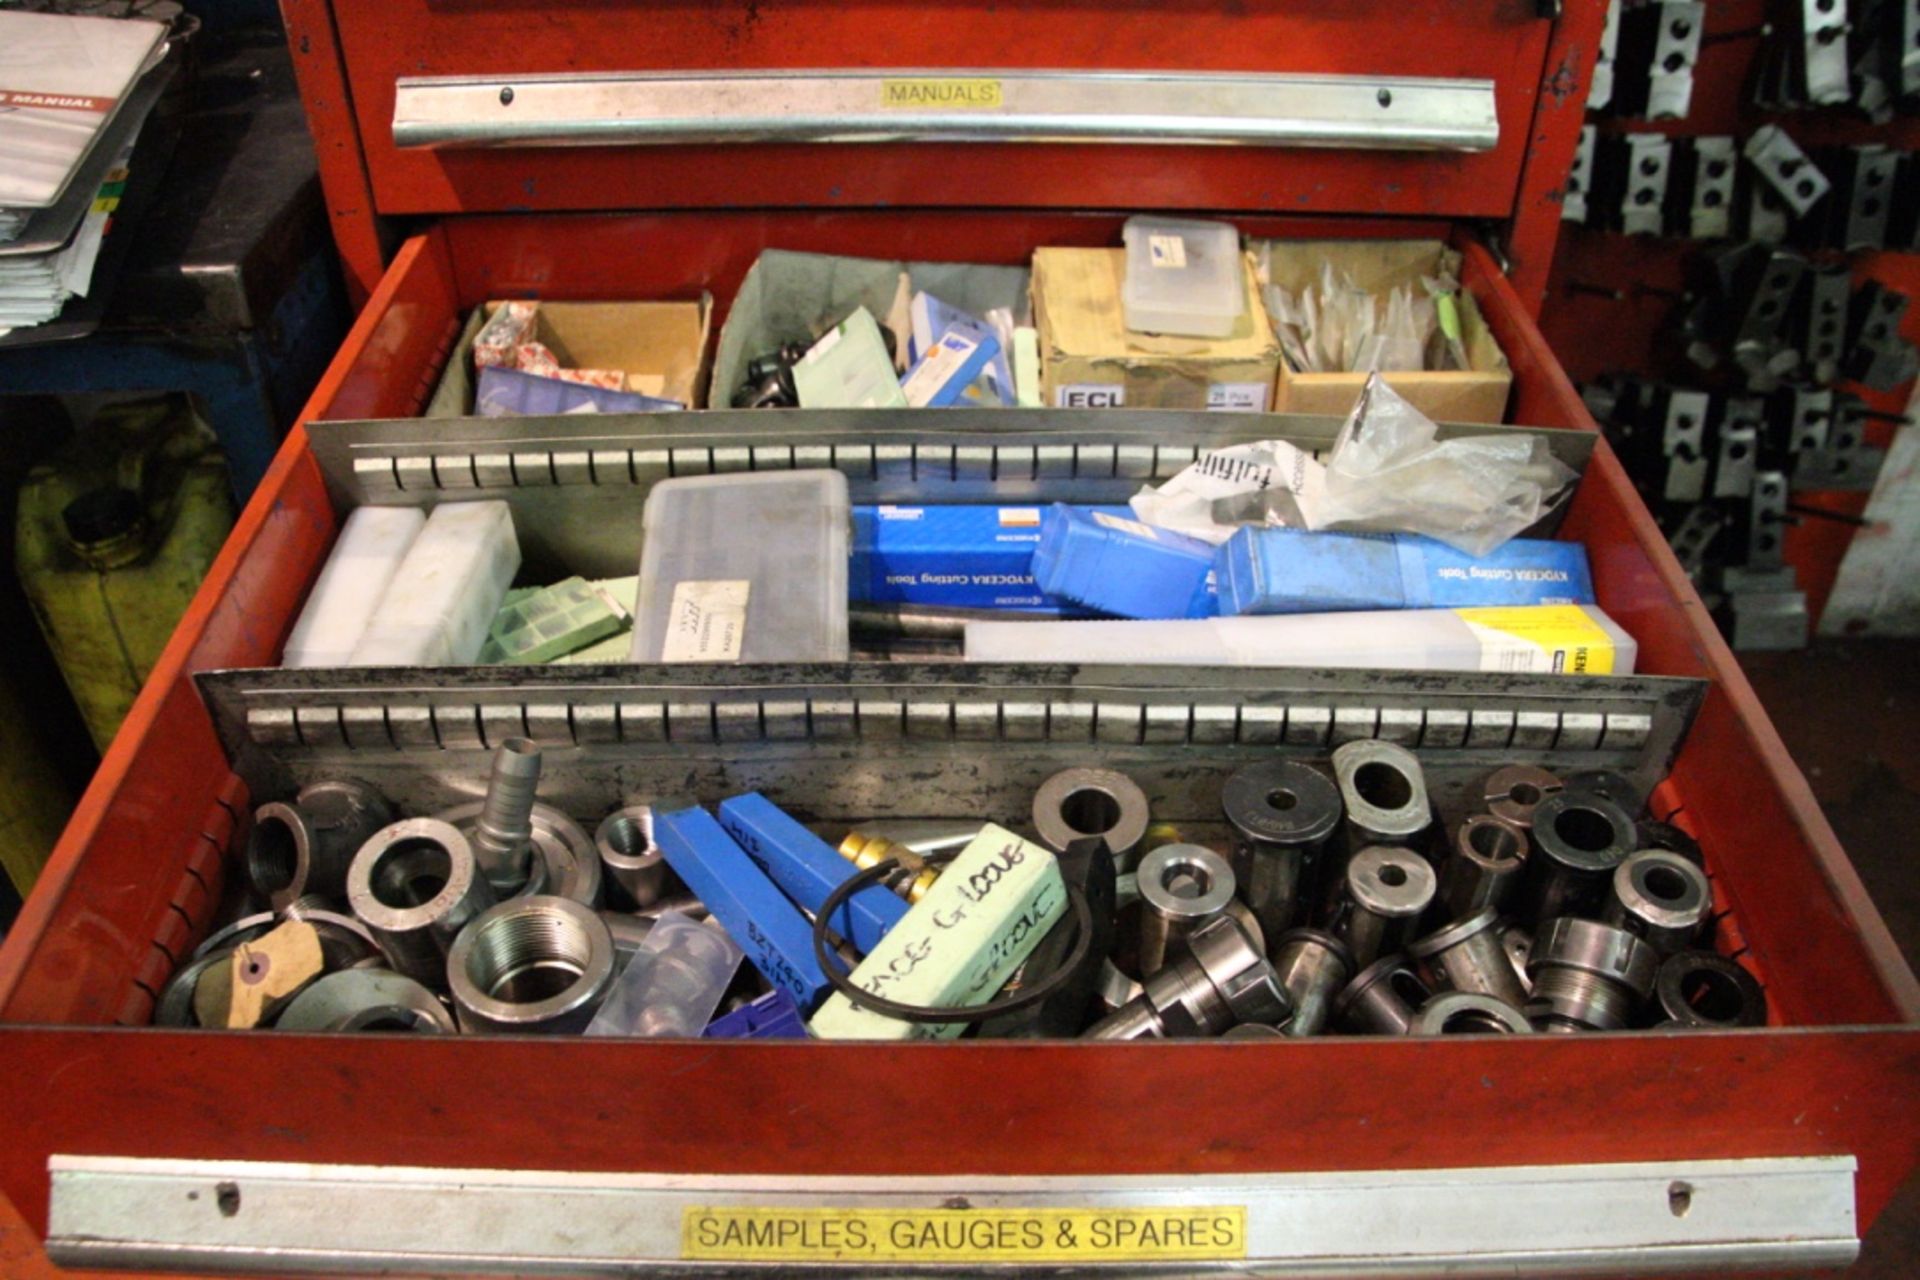 MULTI-DRAWER MOBILE CABINET, with contents including tooling on top of cabinet - Image 10 of 17